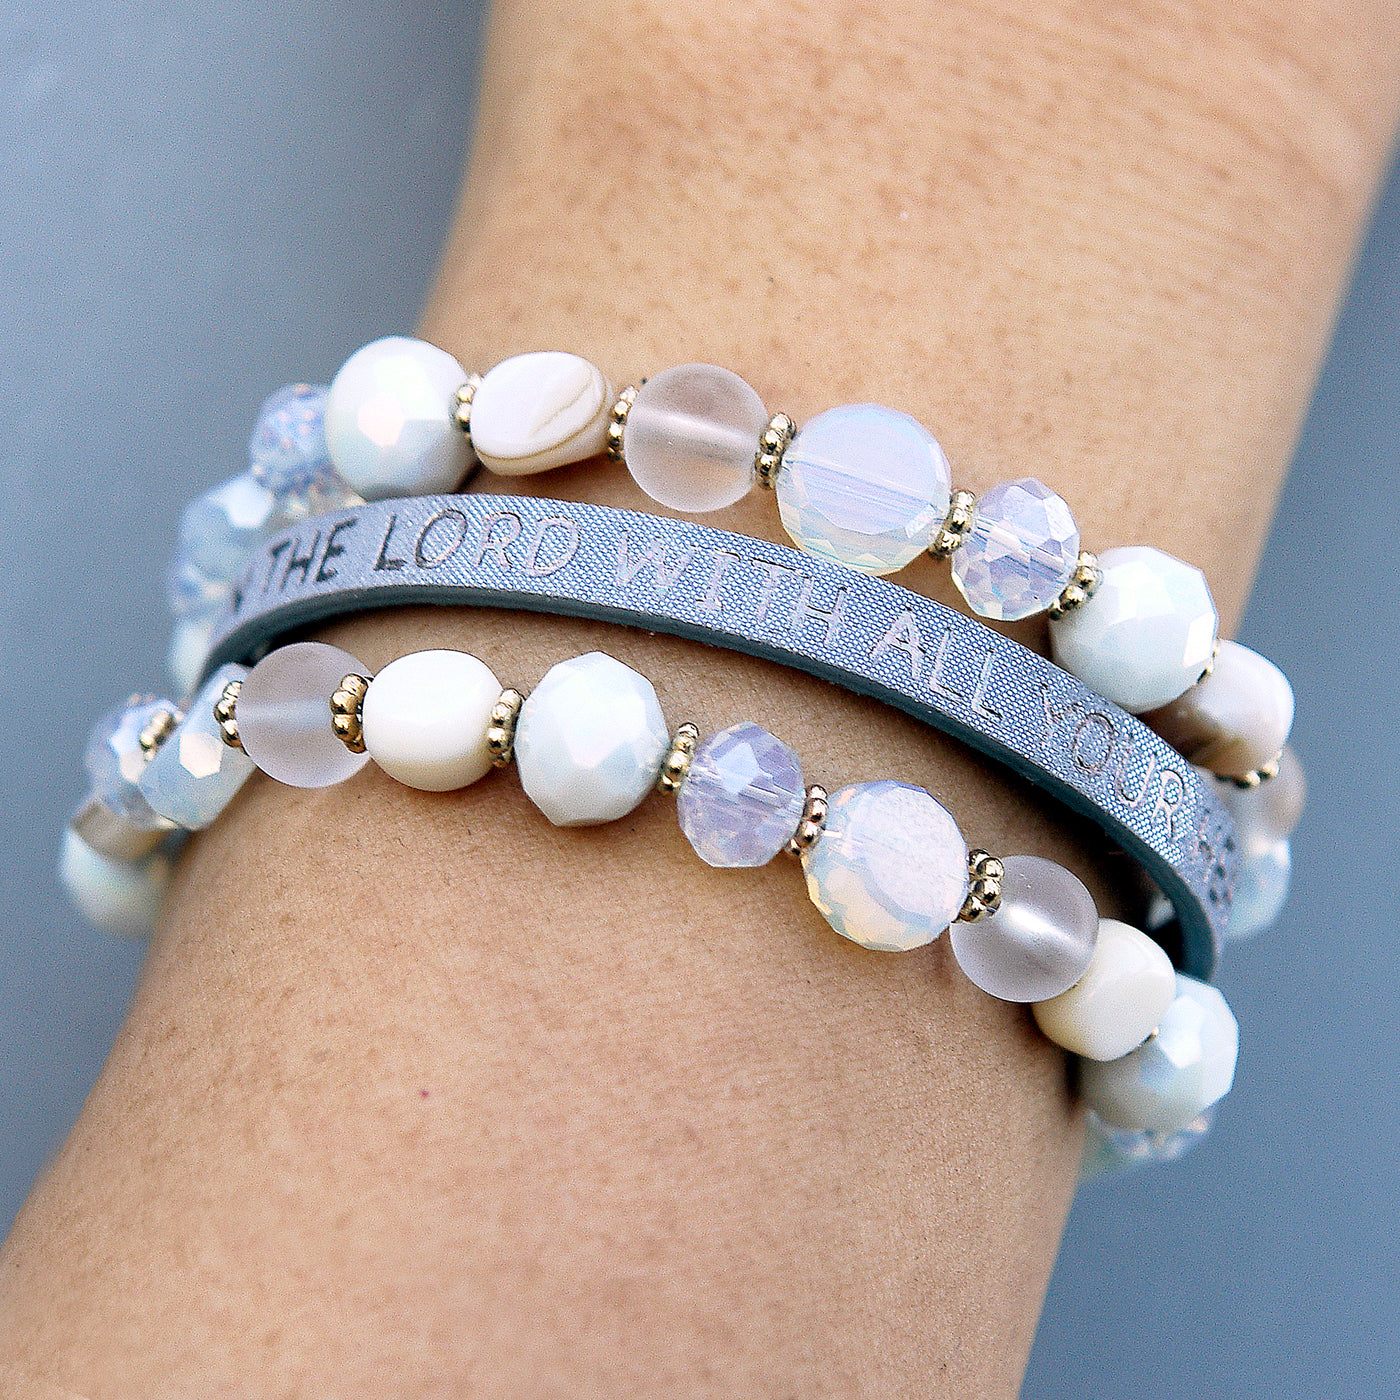 Pure Bible Verse Bracelet-Good Work(s) Make A Difference® | Christian and Inspirational Jewelry Company in Vernon, California